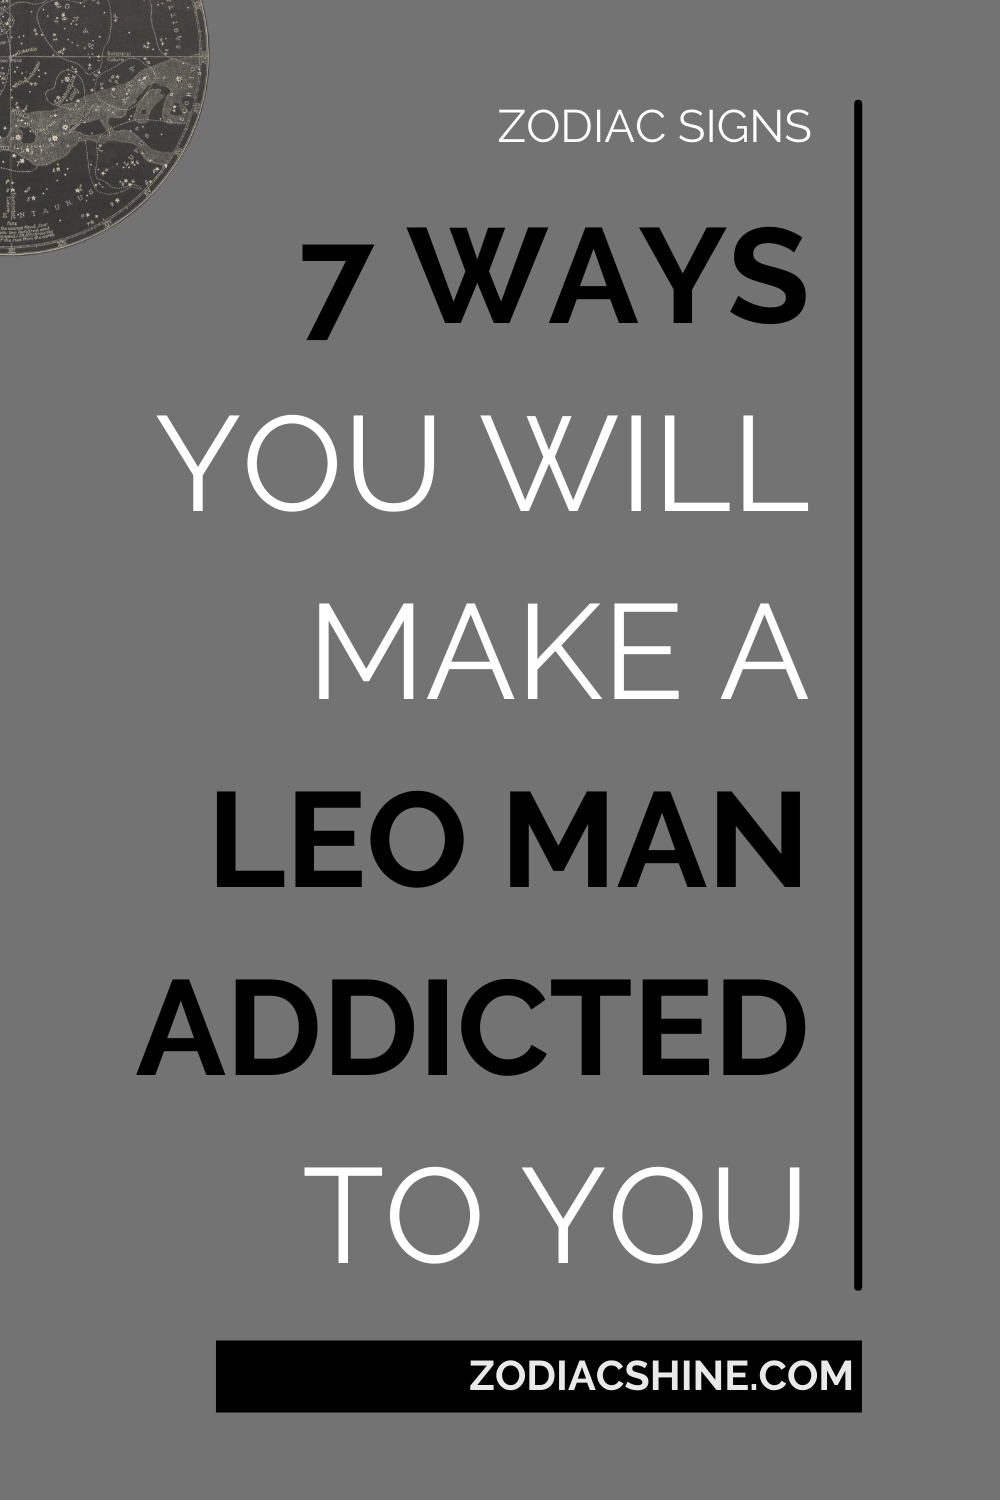 7 Ways You Will Make A Leo Man Addicted To You